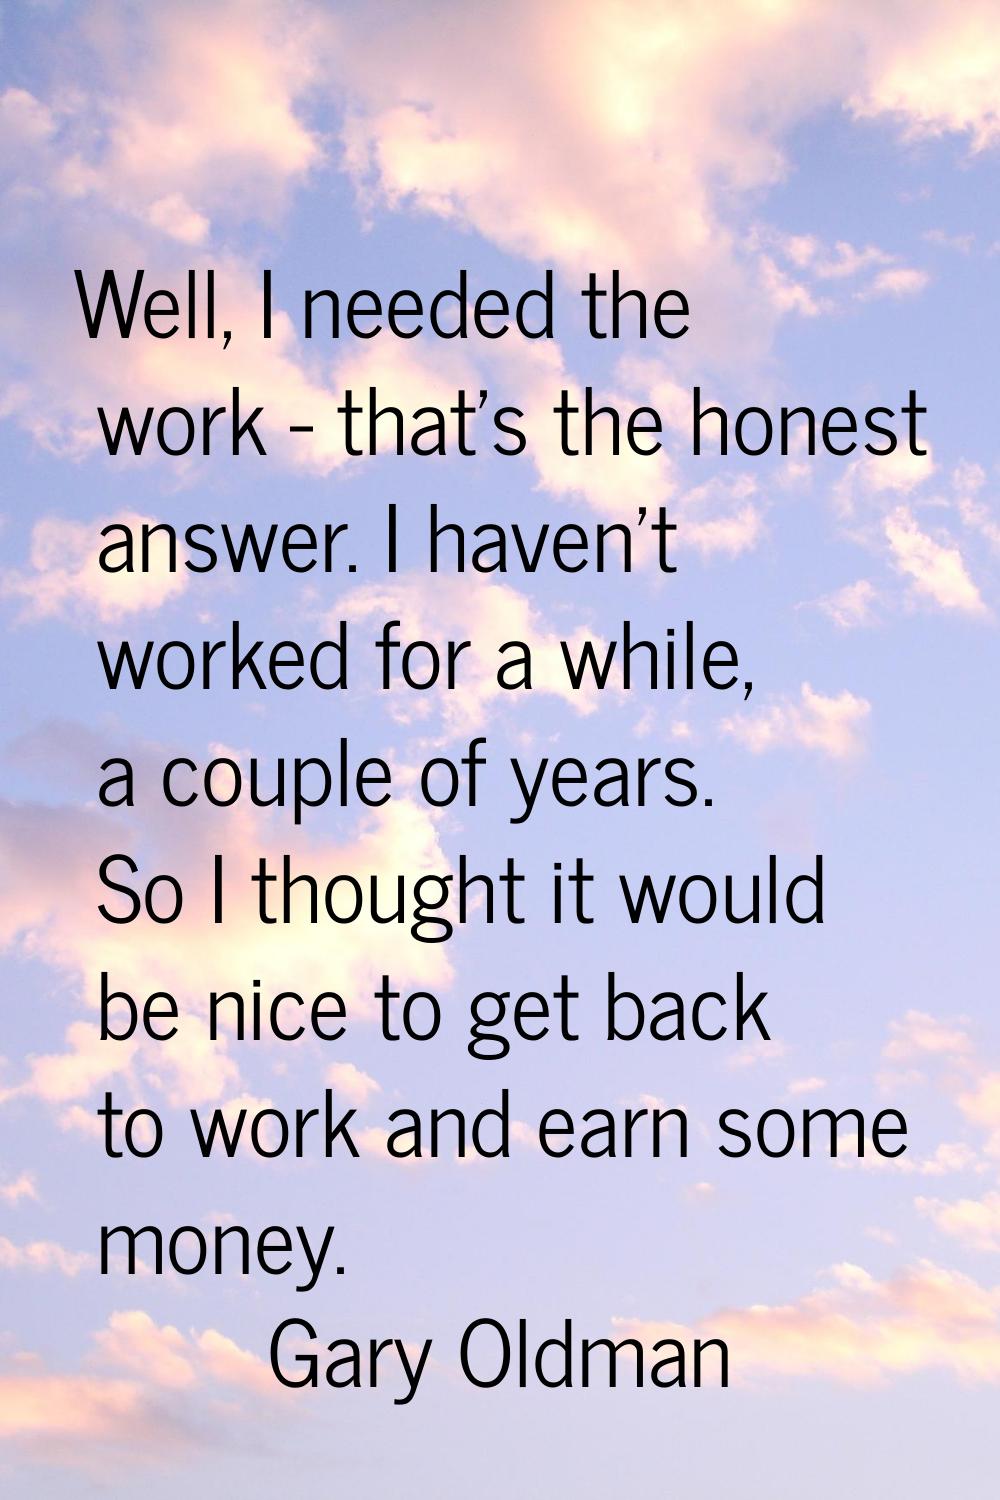 Well, I needed the work - that's the honest answer. I haven't worked for a while, a couple of years